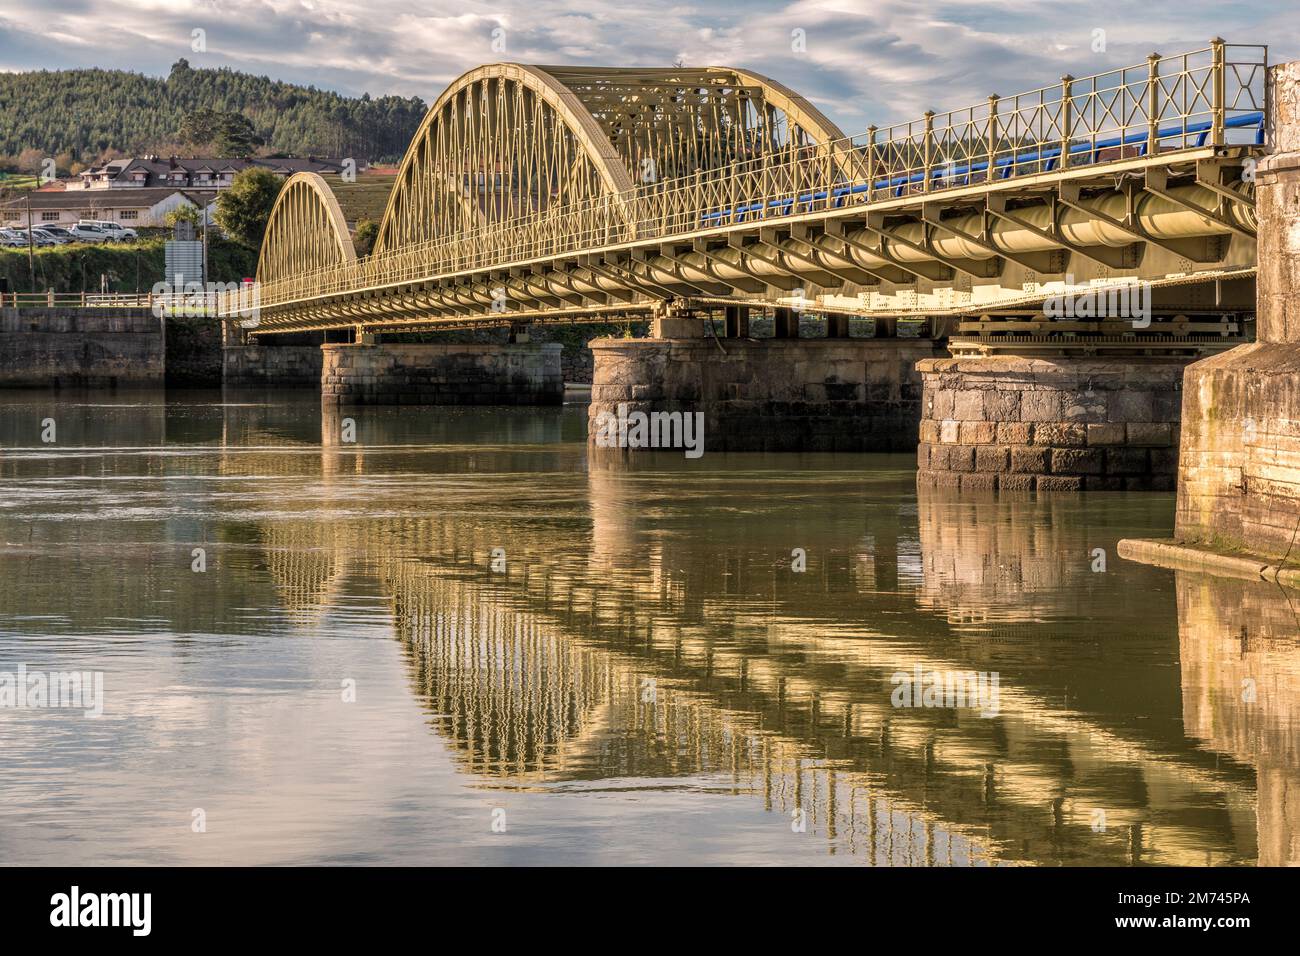 Rotary or Iron Bridge is located on the River Ason, Among Colindres and Treto, Spain, Europe Stock Photo